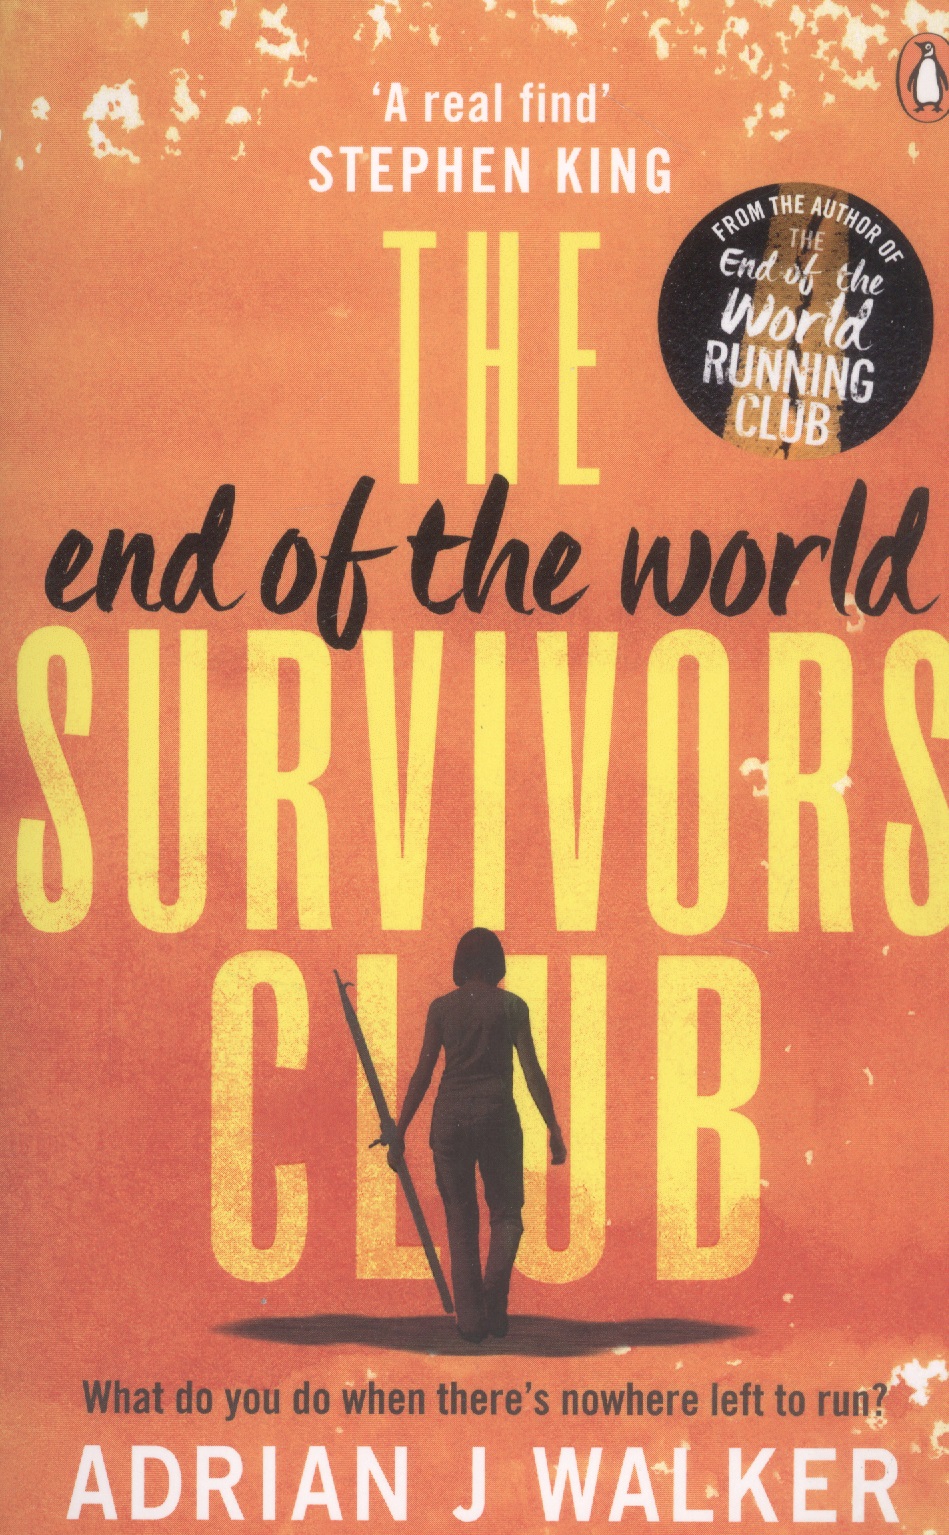 walker adrian j the end of the world running club Уолкер Эдриан The End of the World Survivors Club